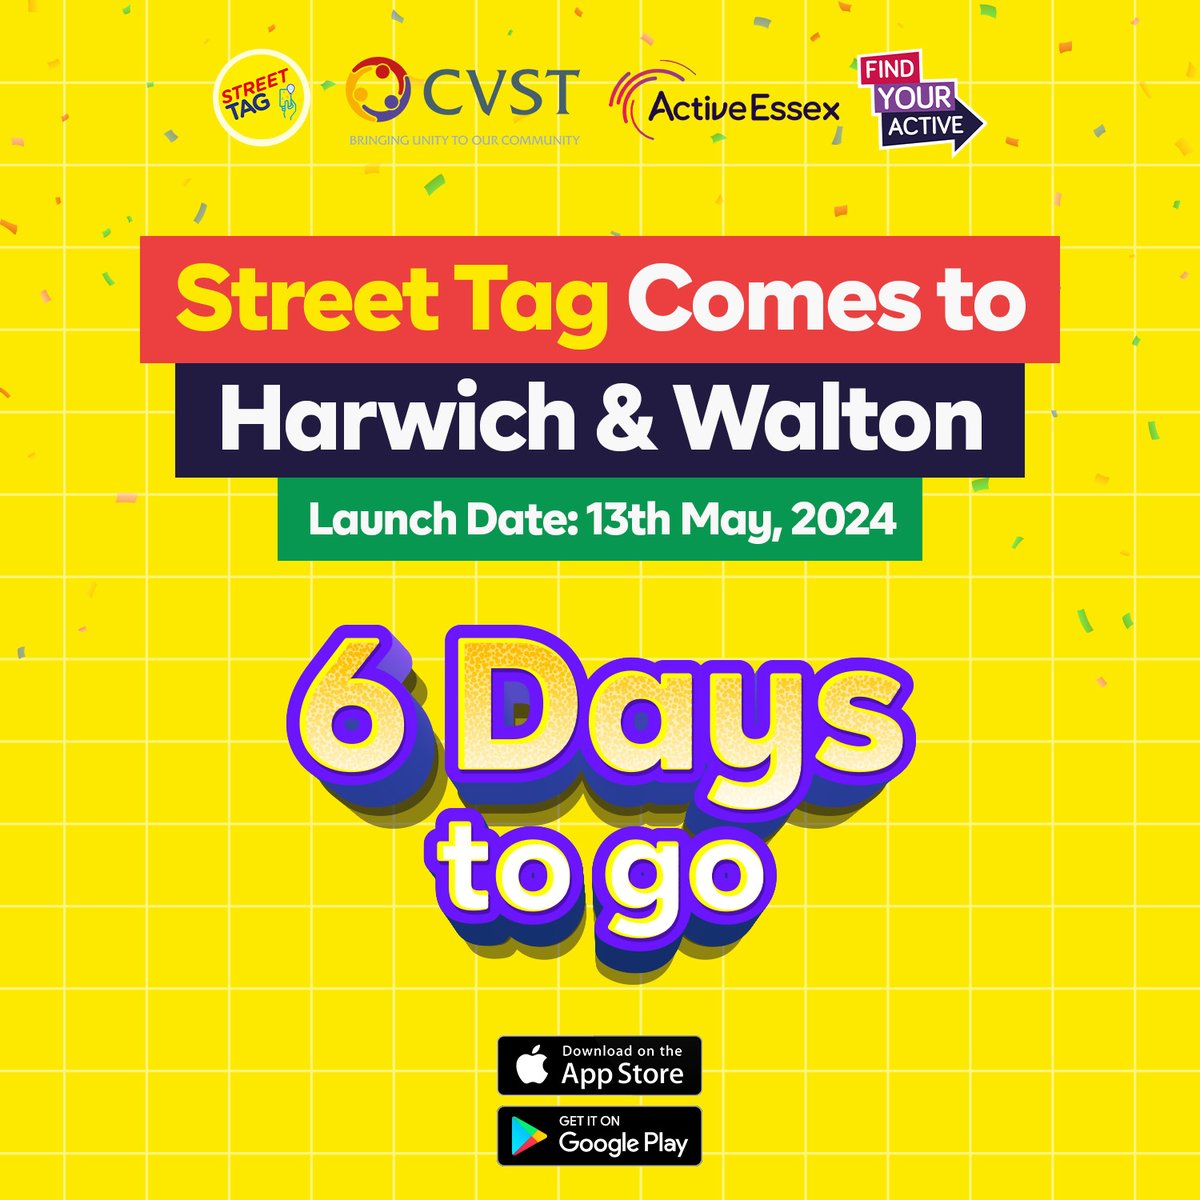 Street Tag is in Harwich & Walton! Walk, run, cycle, roll, or scoot to stay active, collect points and win prizes! The Community Leaderboard season starts on the 13th of May, 2024, so don't wait—download the app and dive into the action TODAY! @cvstendring @activeessex